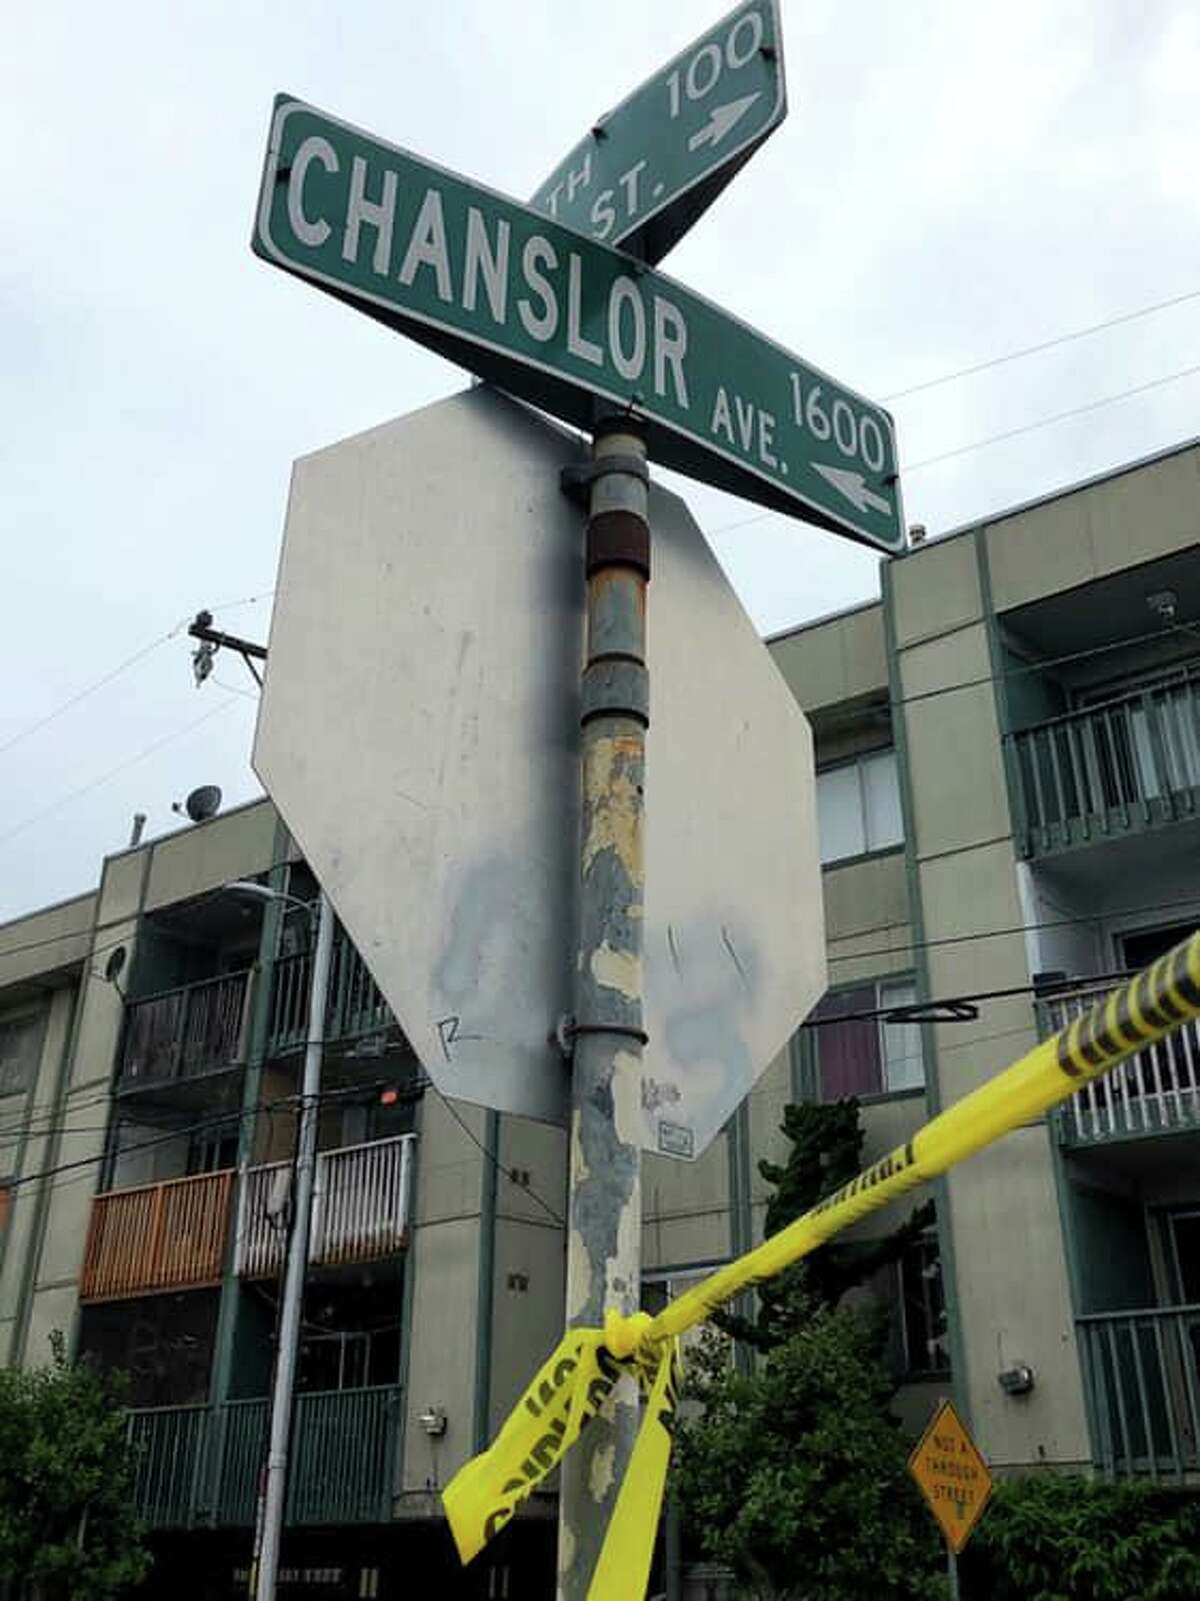 Miguel Ramirez had just gotten home from his job at KPIX in San Francisco and was checking the mailbox outside of his home on the 1600 block of Chanslor Avenue shortly after 5 p.m. when he was shot from a nearby “gun battle” on May 14, 2019, according to the Richmond Police Department.